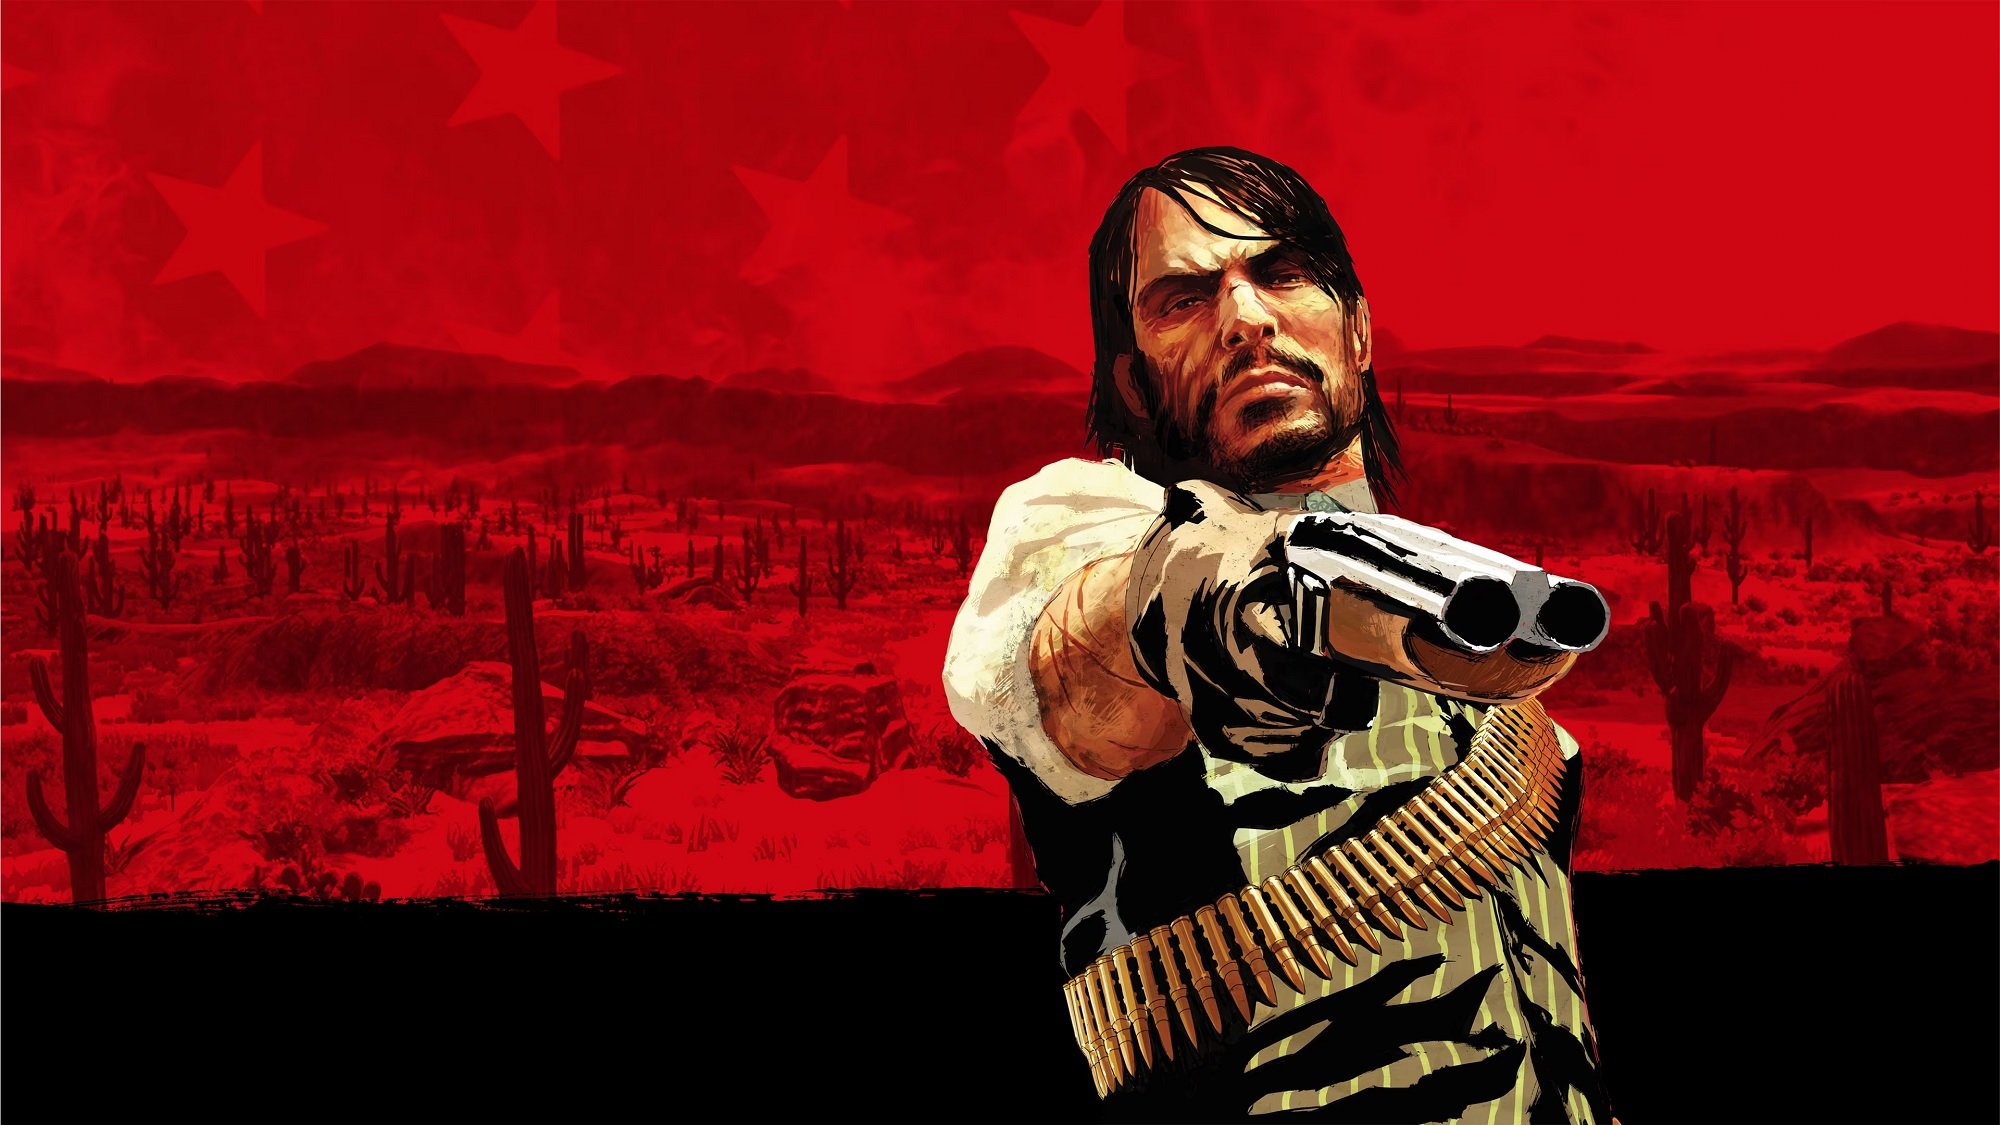 Red Dead Redemption Receives 60fps Update on PS5, PC Release Hopes